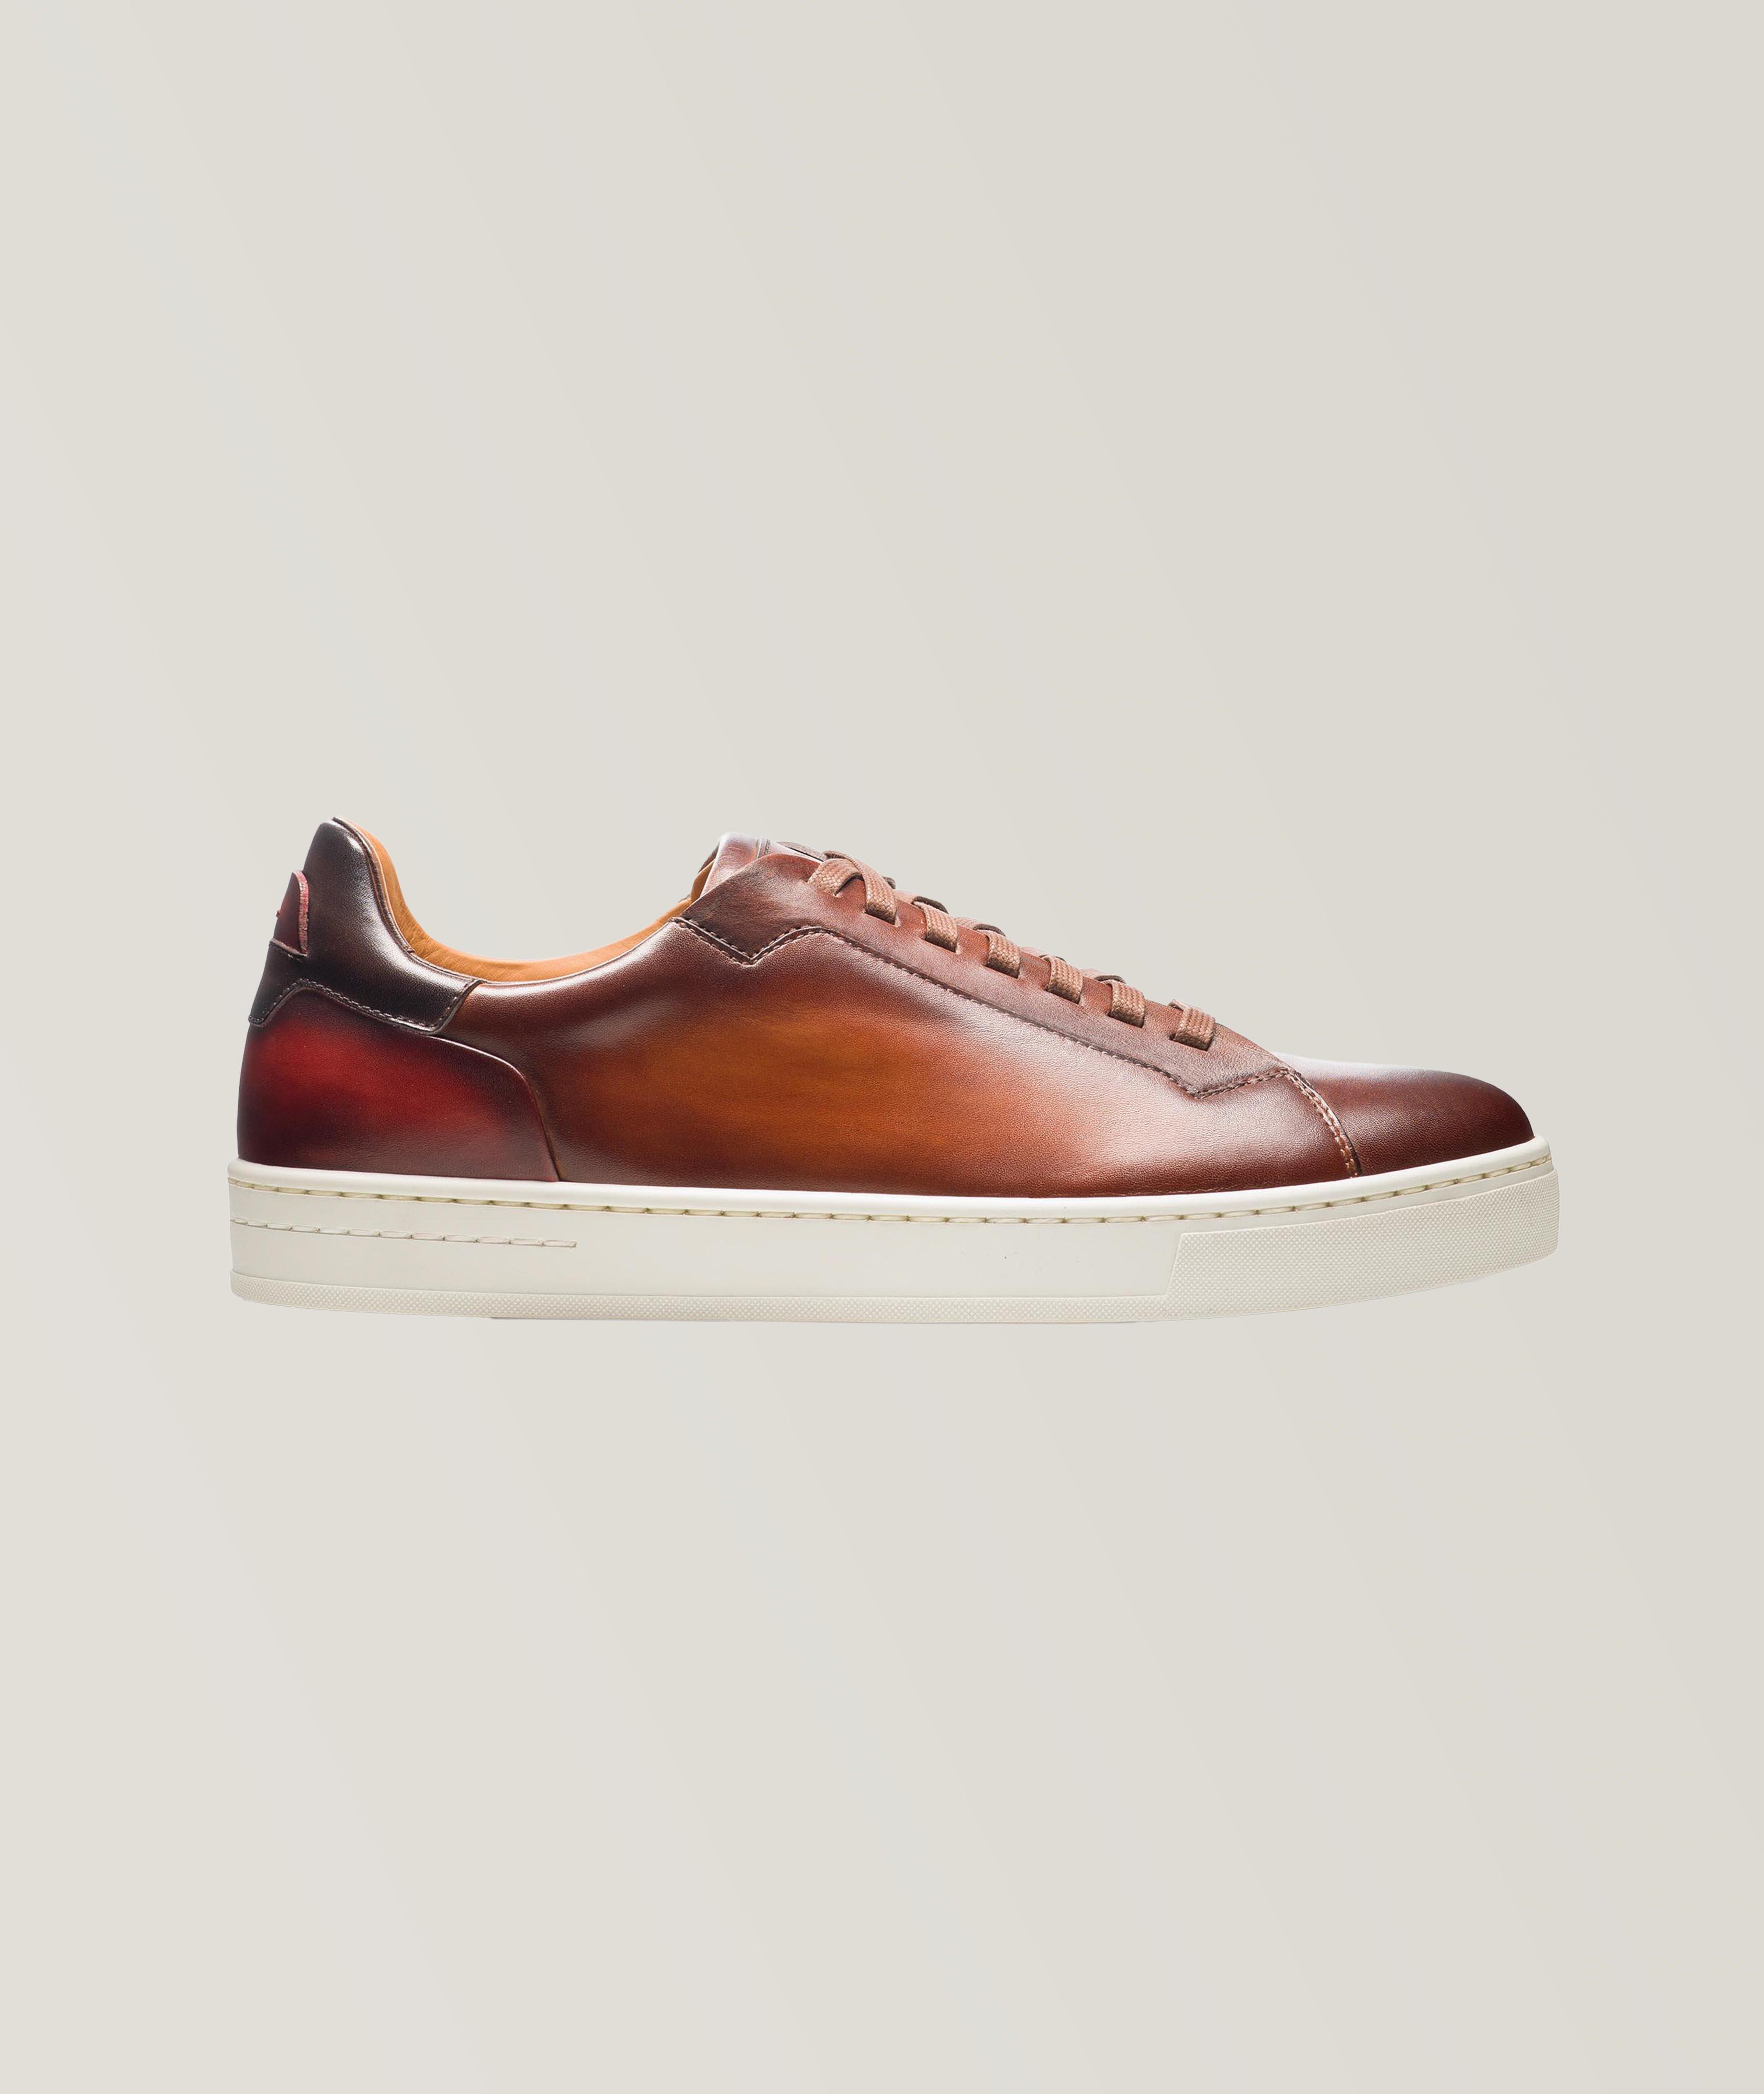 Amadeo Leather Sneakers image 0